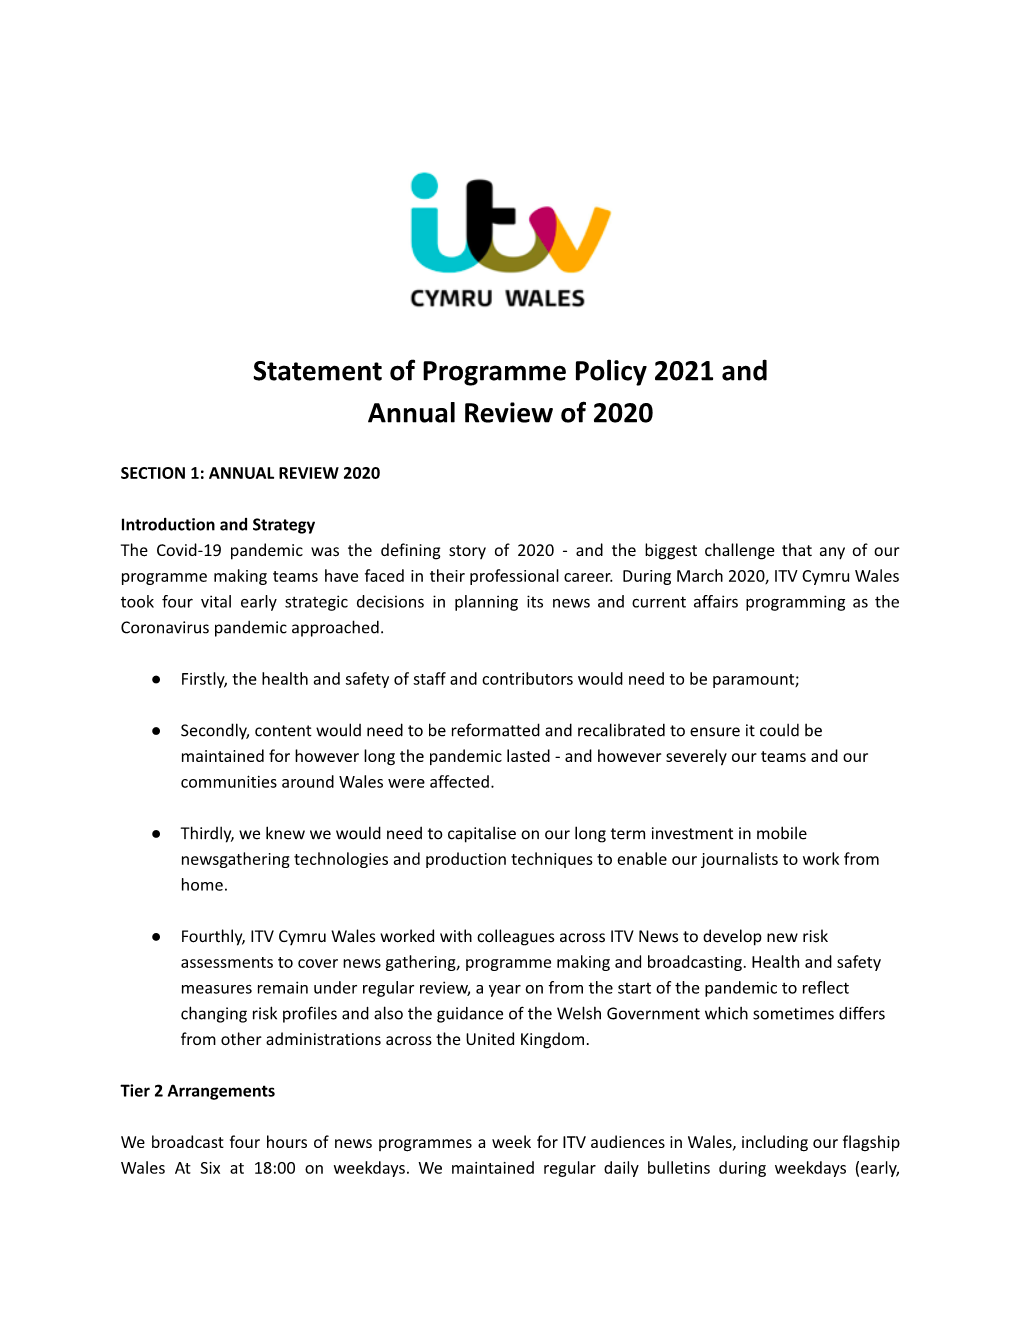 ITV Cymru Wales Statement of Programme Policy 2021 And